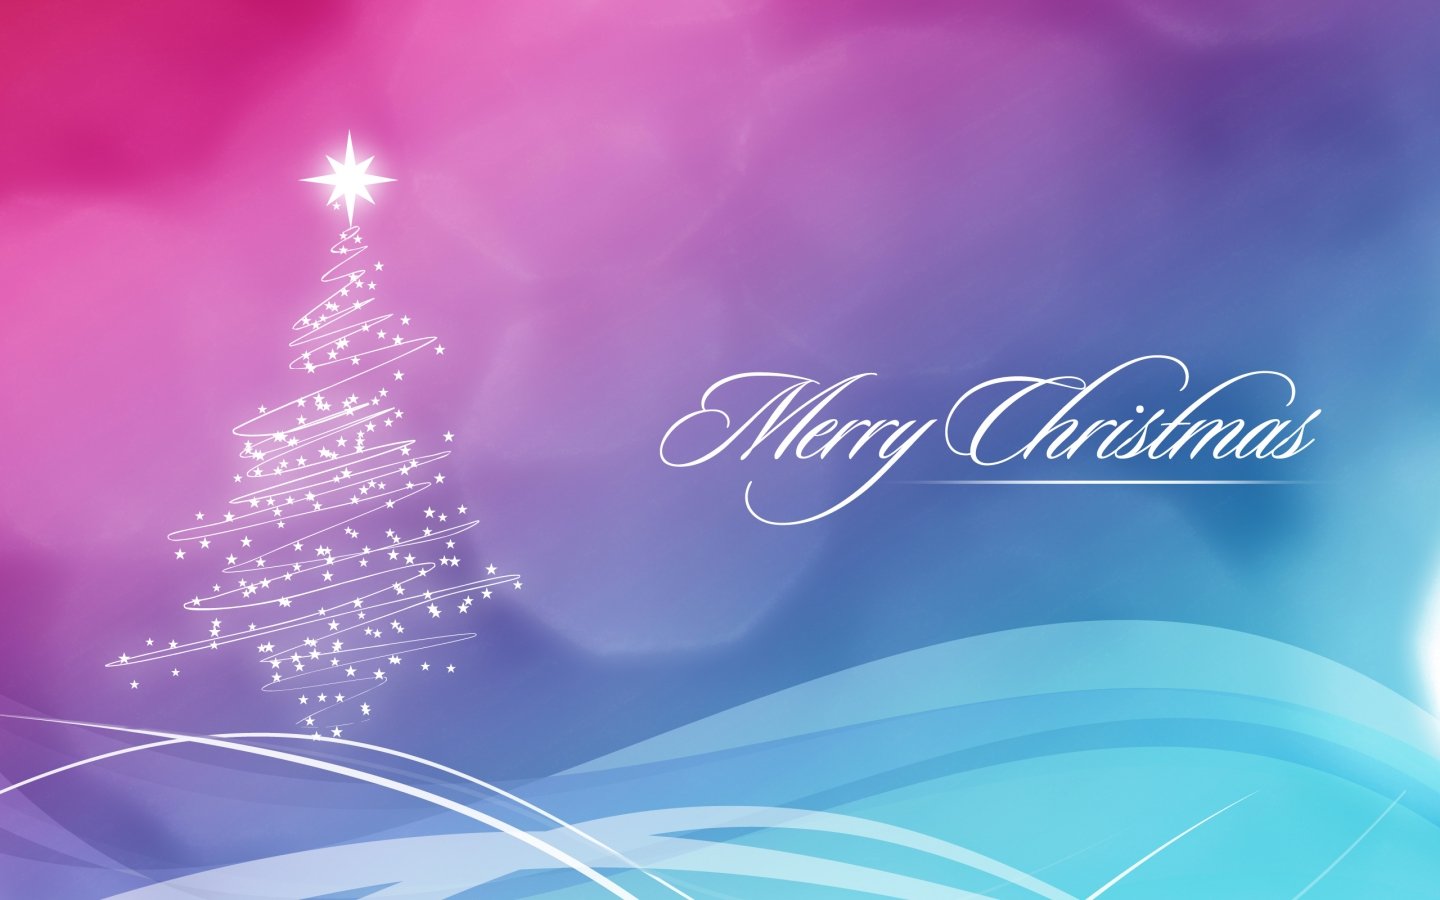 PicturesPool Happy Christmas 2013 Merry Xmas Wallpapers 1440x900